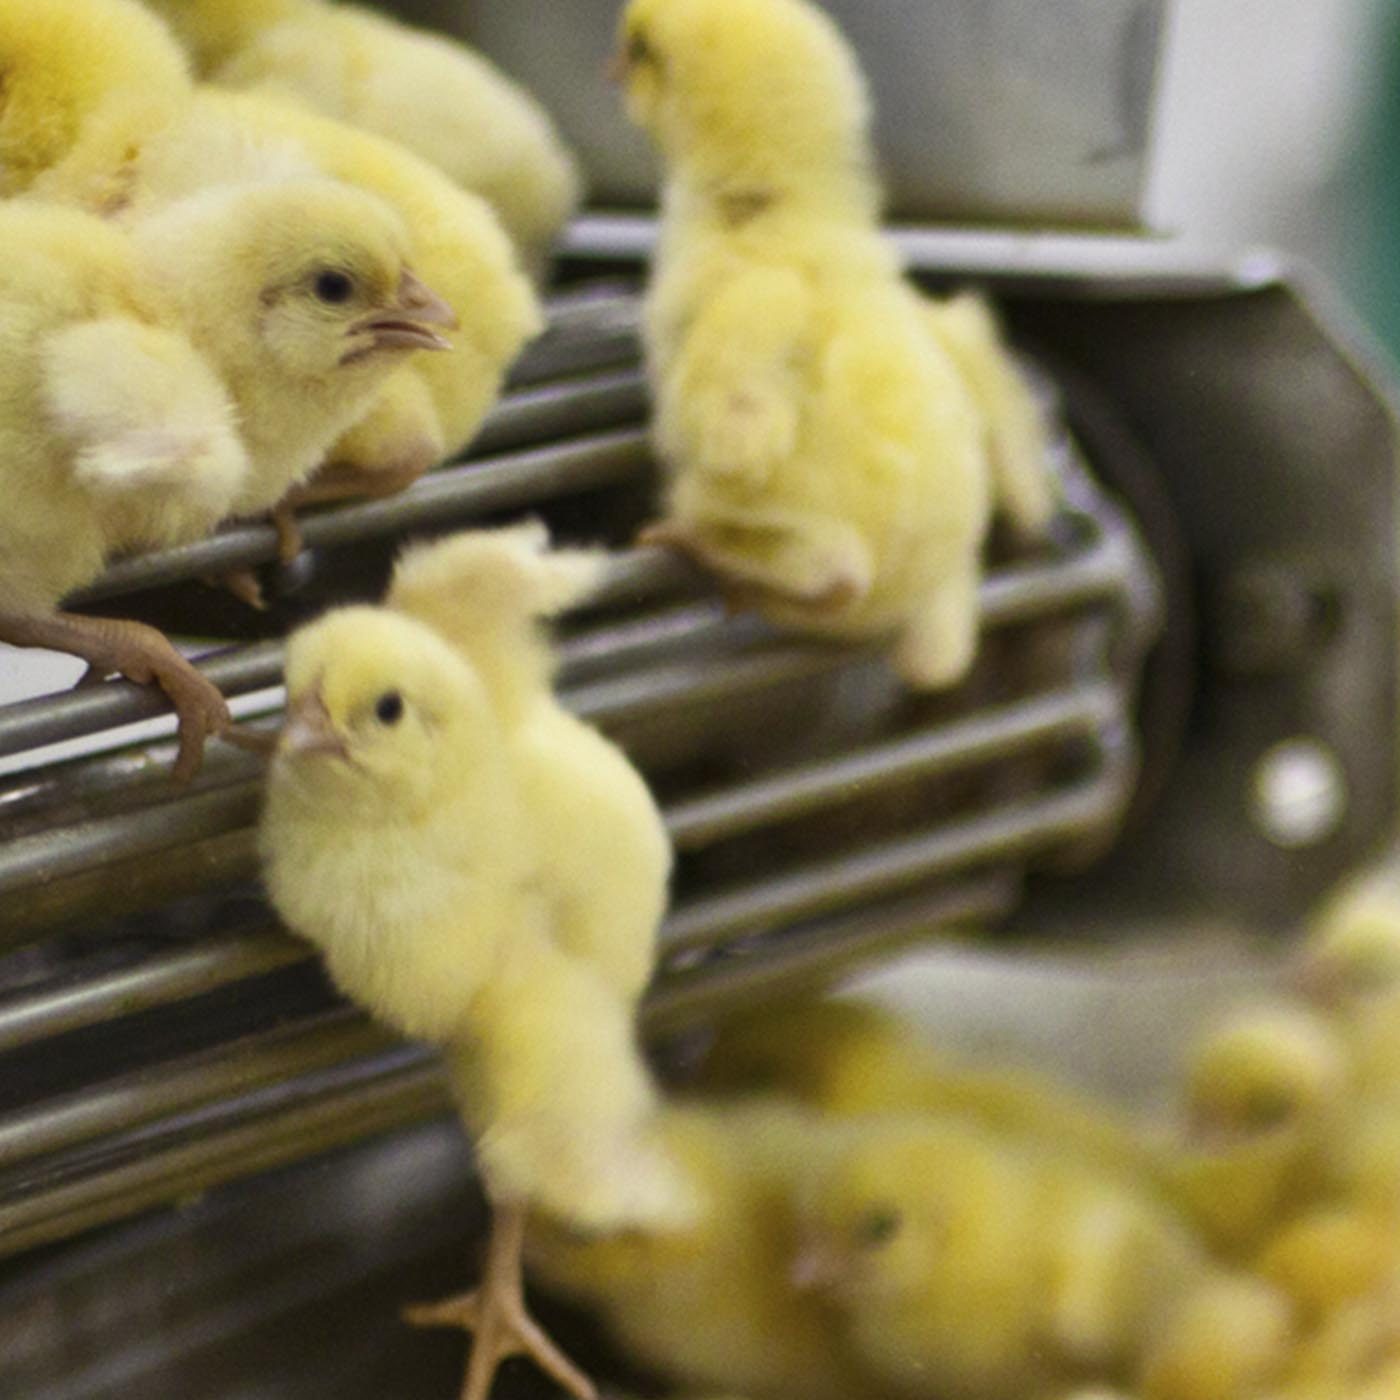 Egg Industry Exposed: Chicks Ground Up, Suffocated Alive